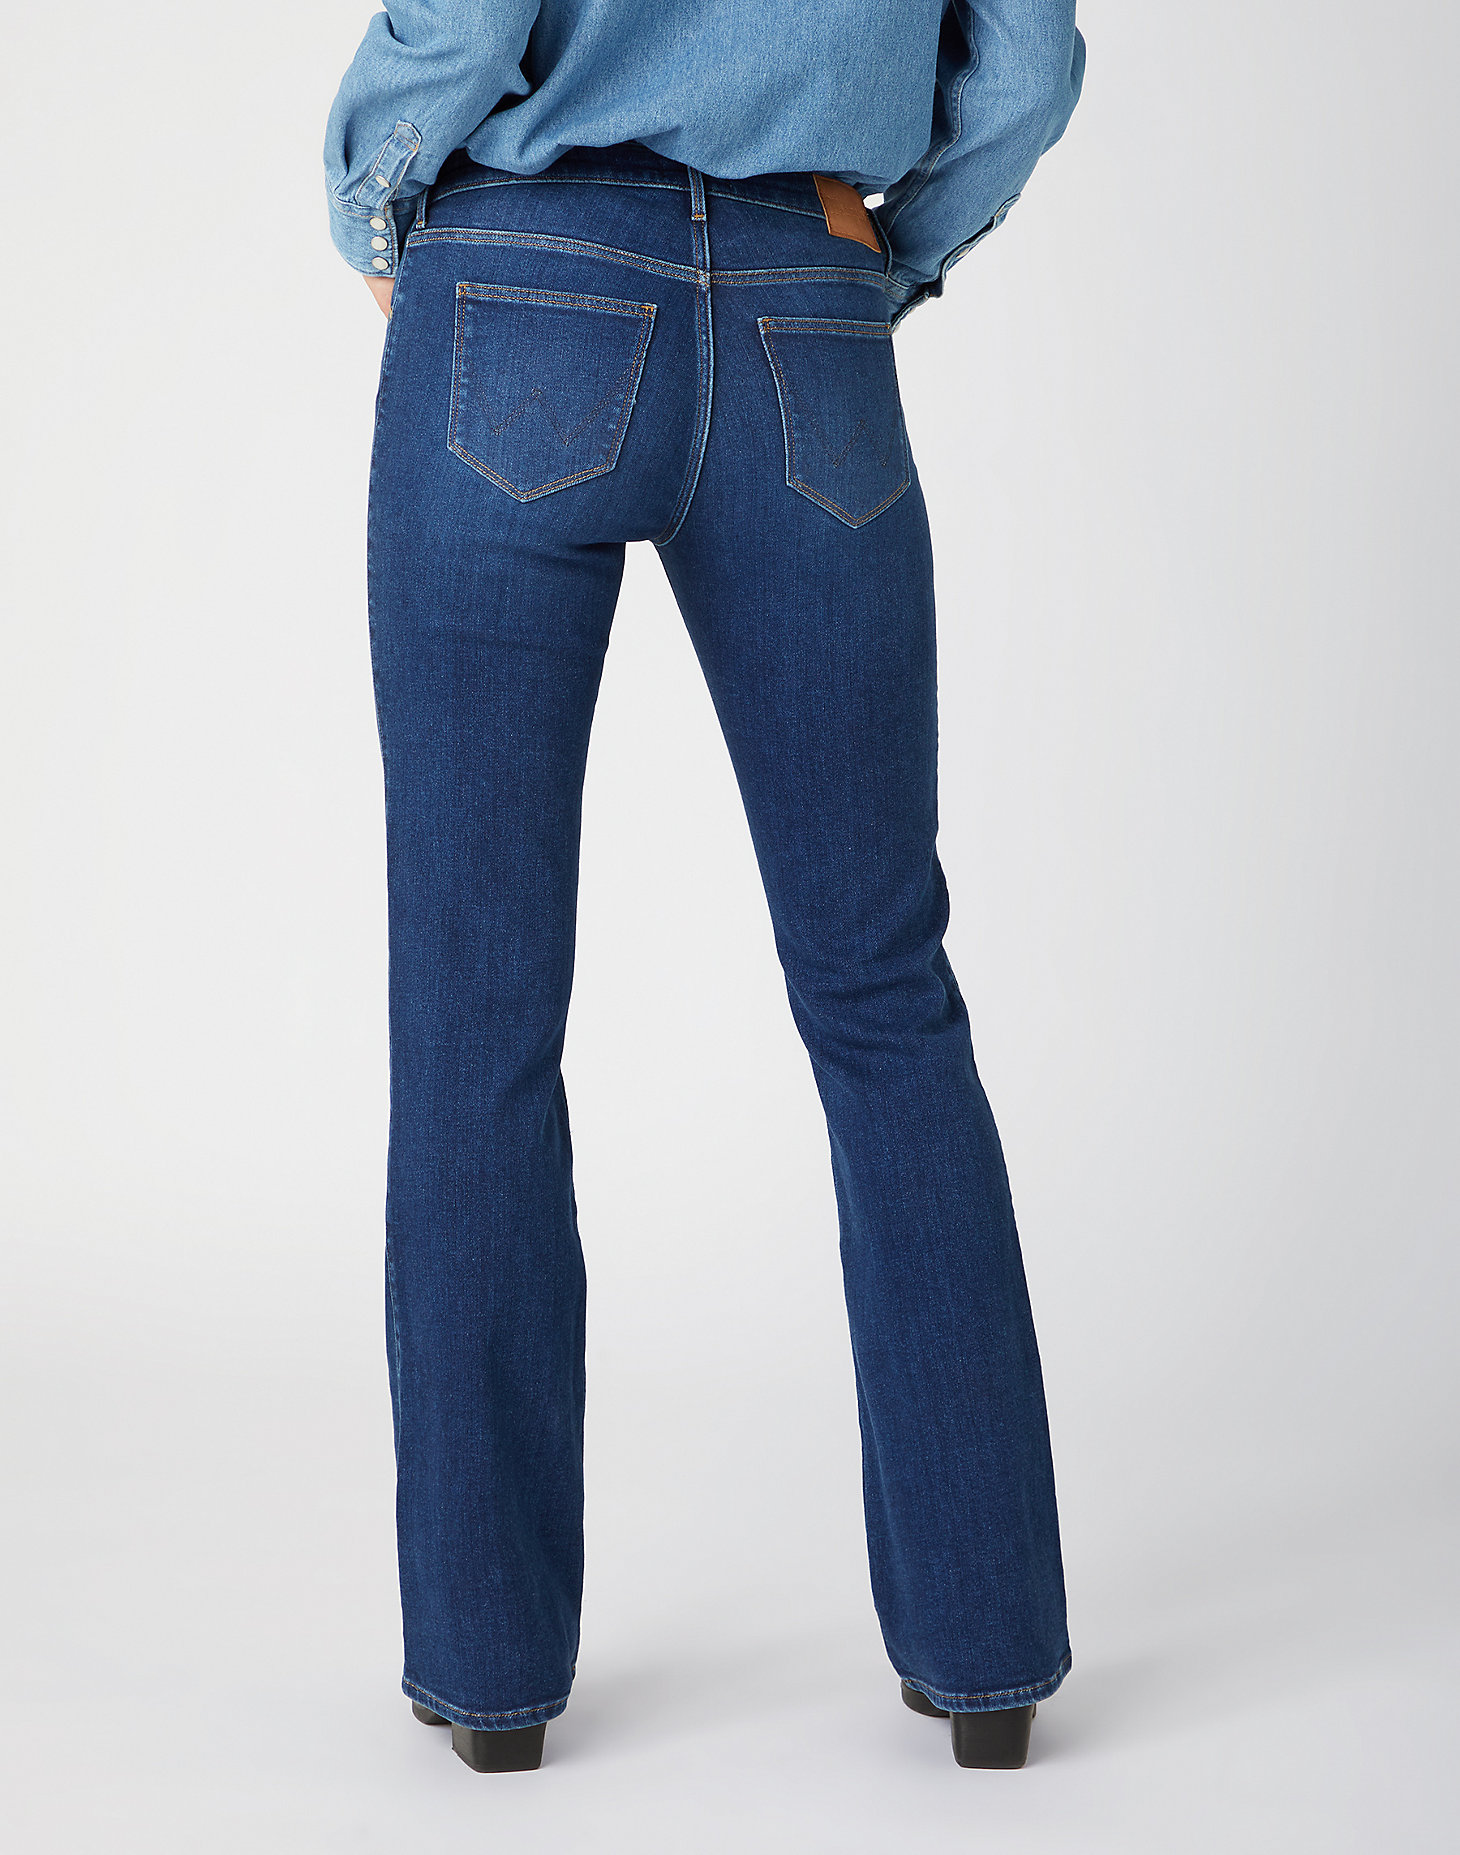 Bootcut Jeans in Authentic Love alternative view 2